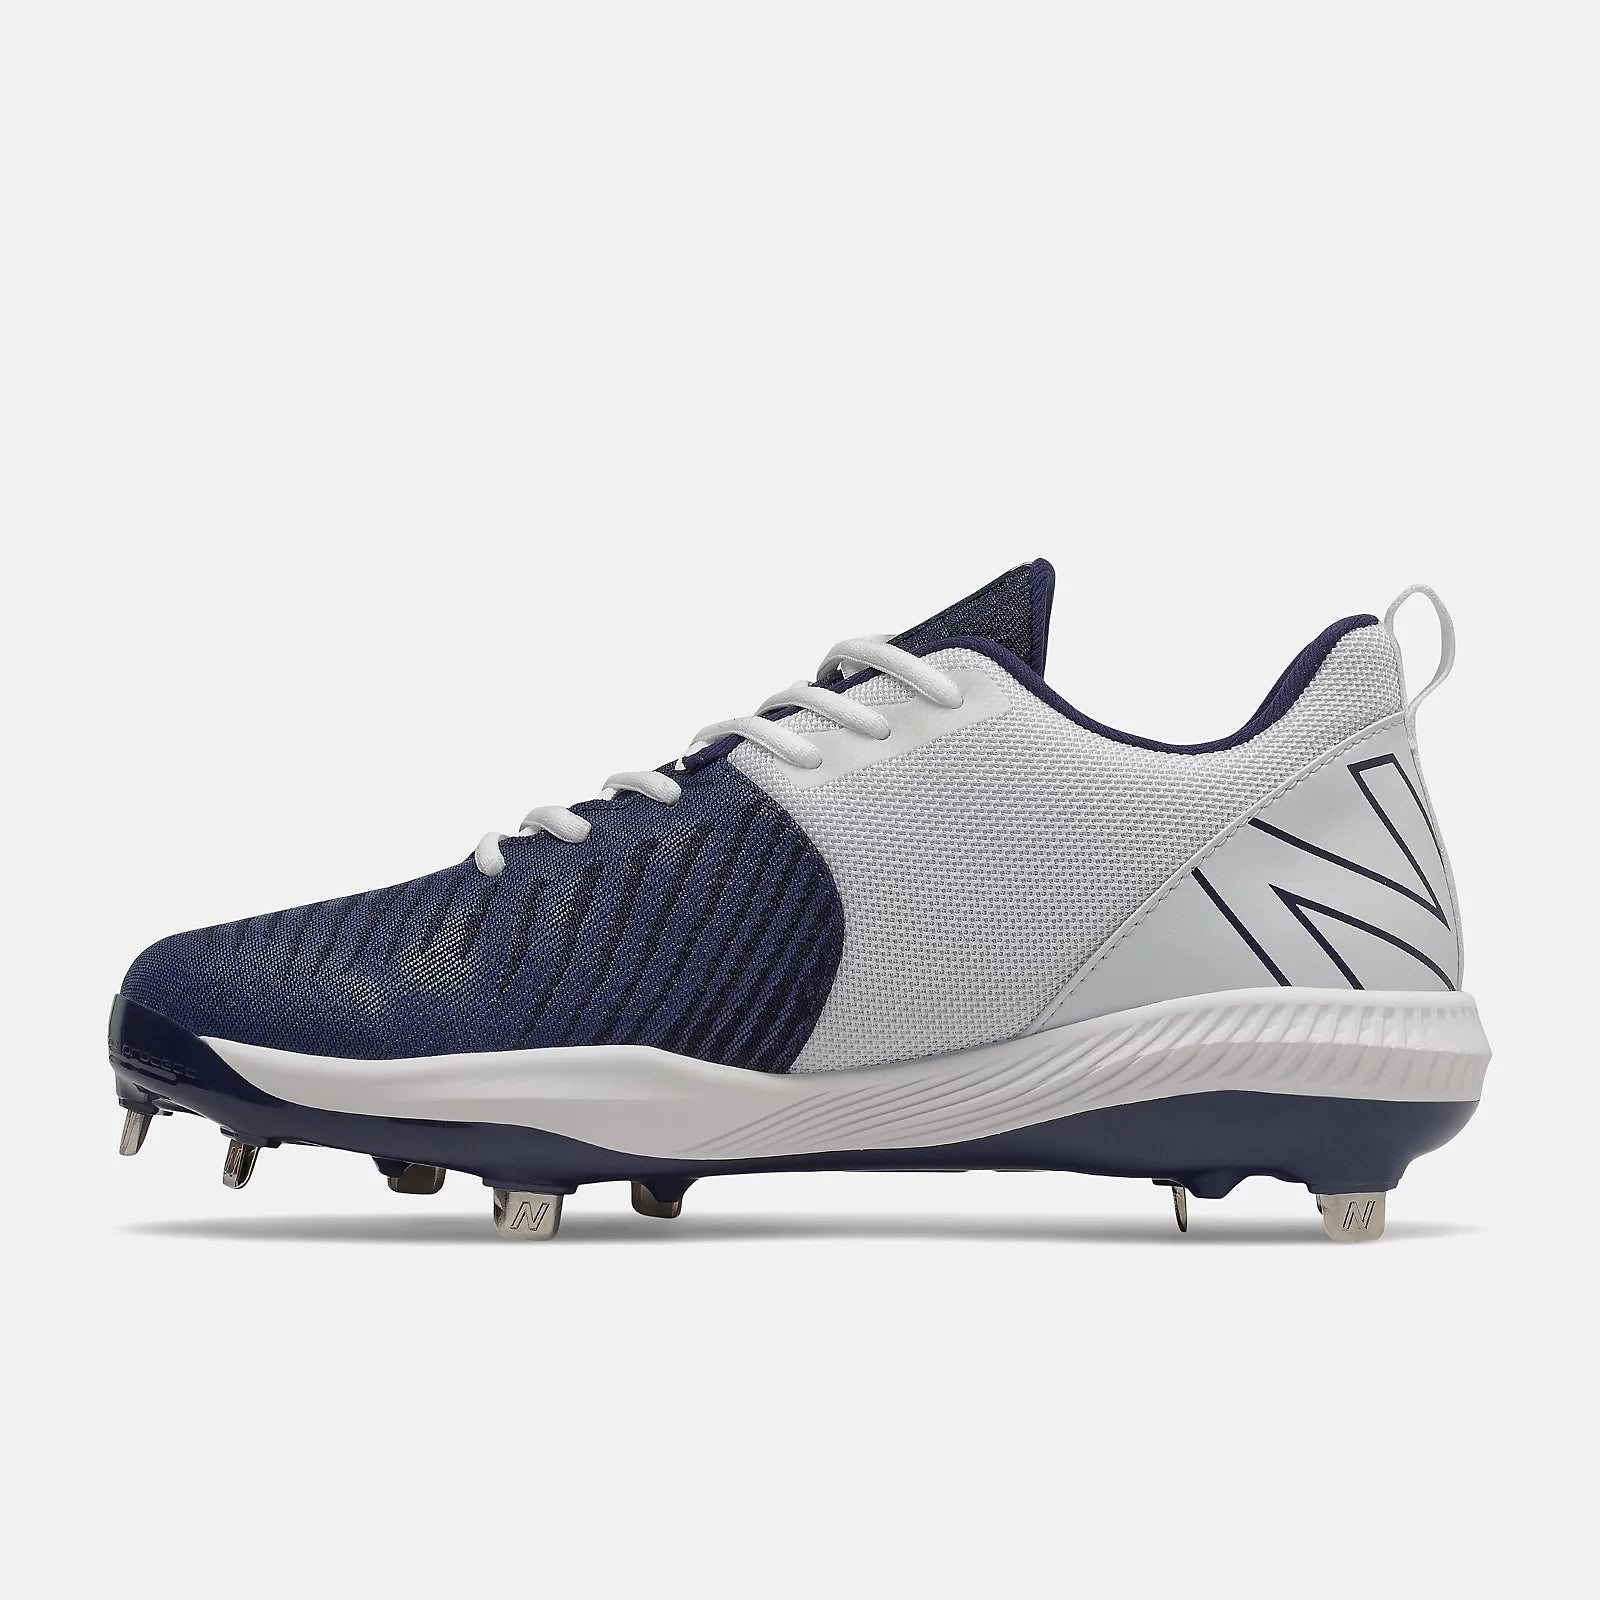 New Balance - Navy/White FuelCell 4040v6 Metal Spikes (L4040TN6)